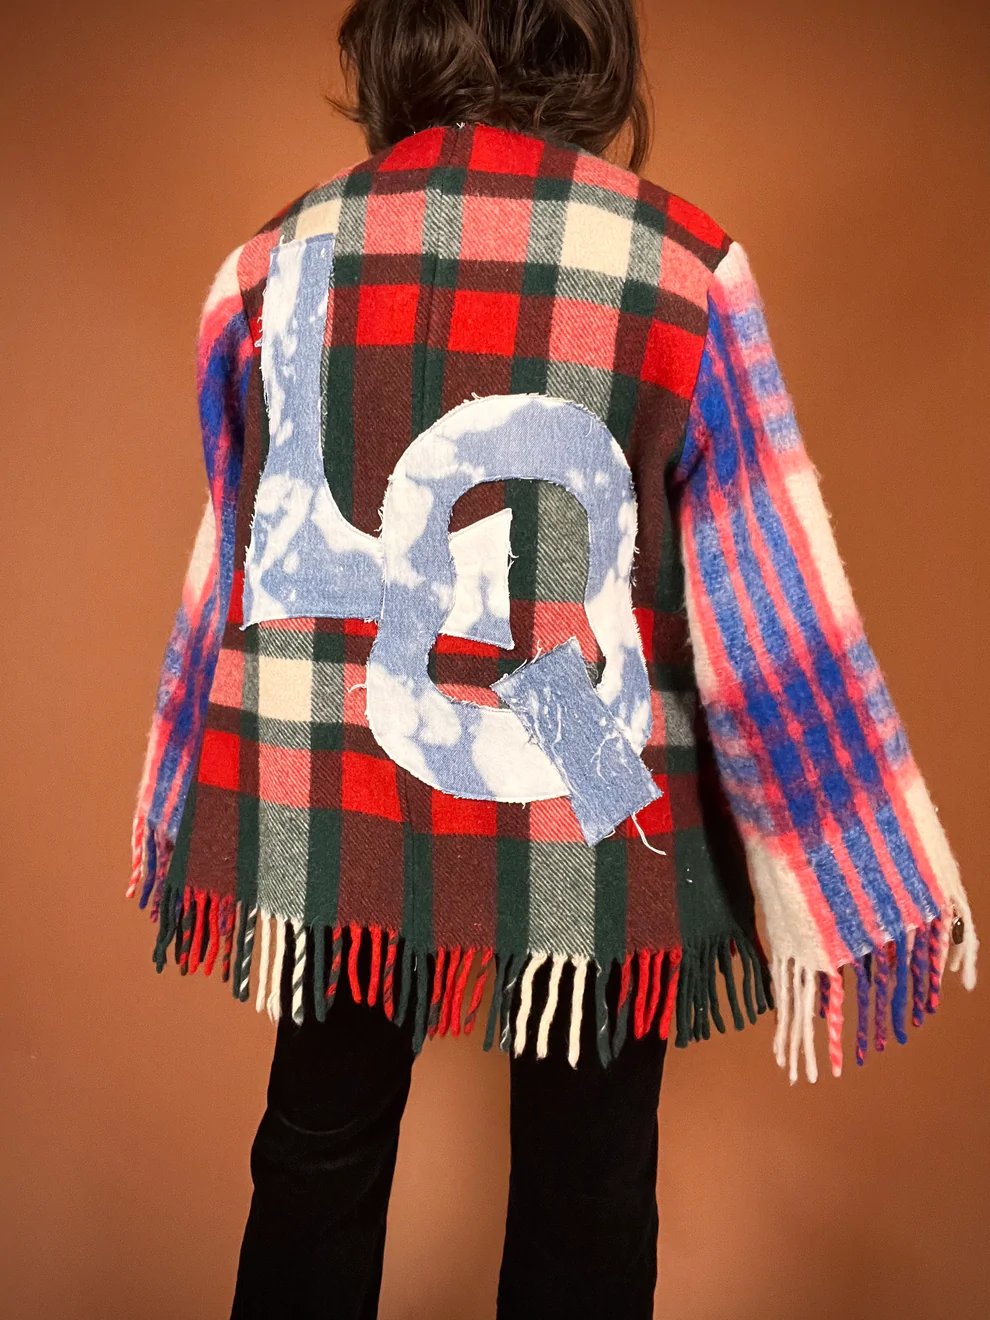 a young girl wearing a plaid jacket with the letter q on it.